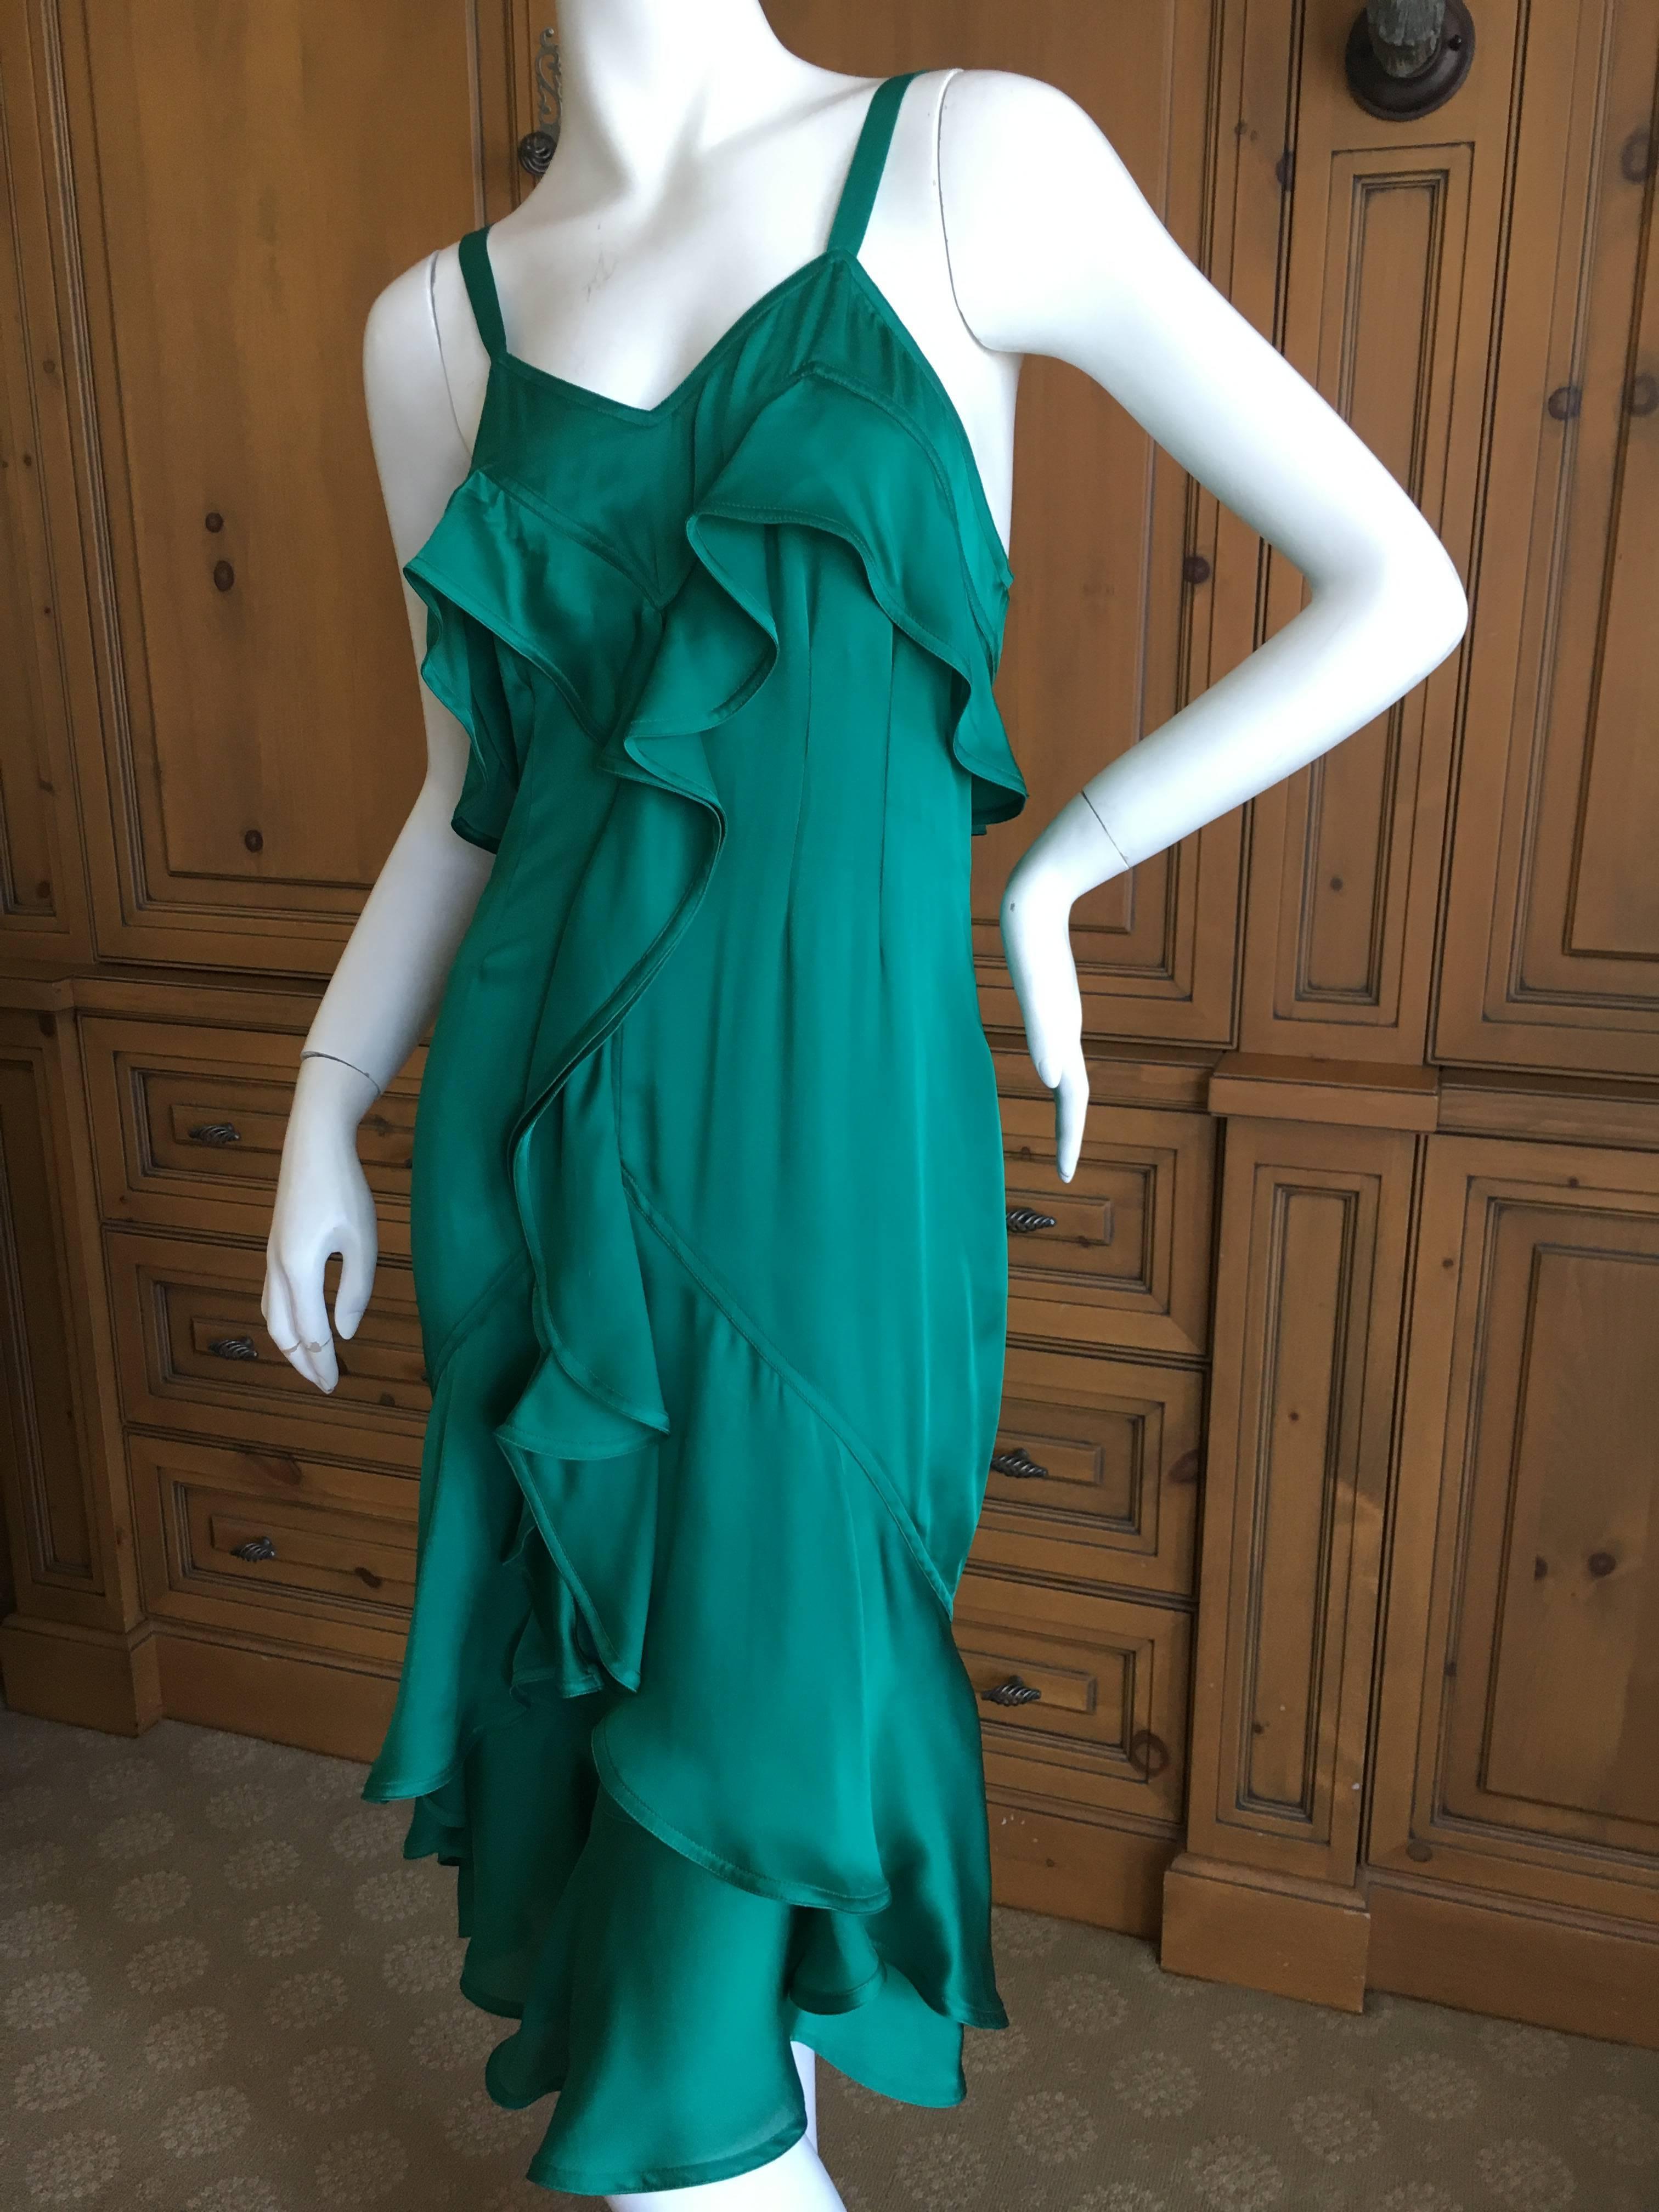 Yves Saint Laurent Tom Ford Fall 2003 Look 1 Green Ruffle Dress In Excellent Condition For Sale In Cloverdale, CA